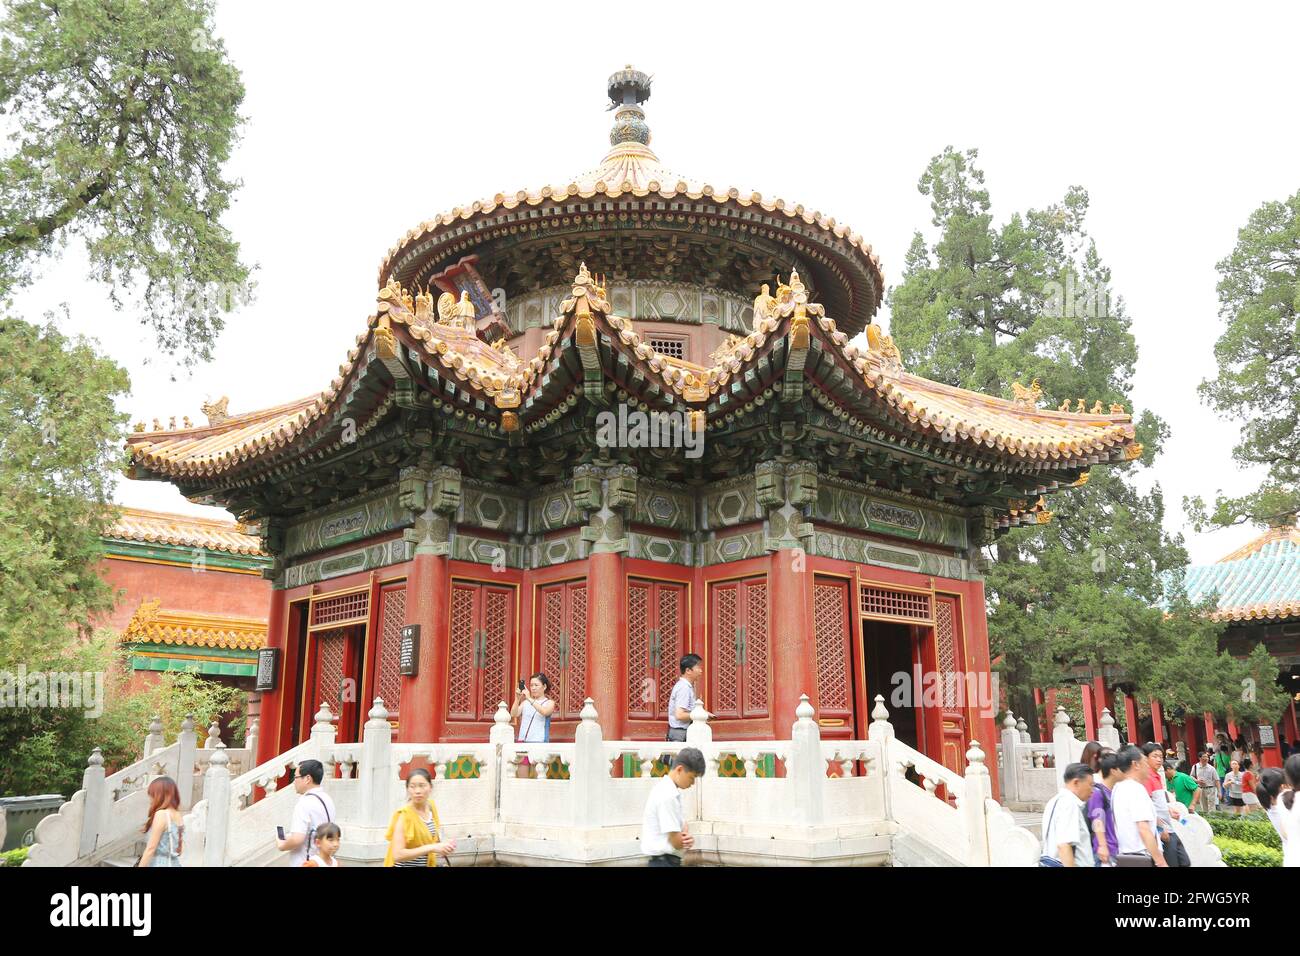 Side View of The Pavilion of Myriad Springs or Wanchunting in The Imperial Gardens of The Forbidden City Palace Museum Beijing, China. Stock Photo